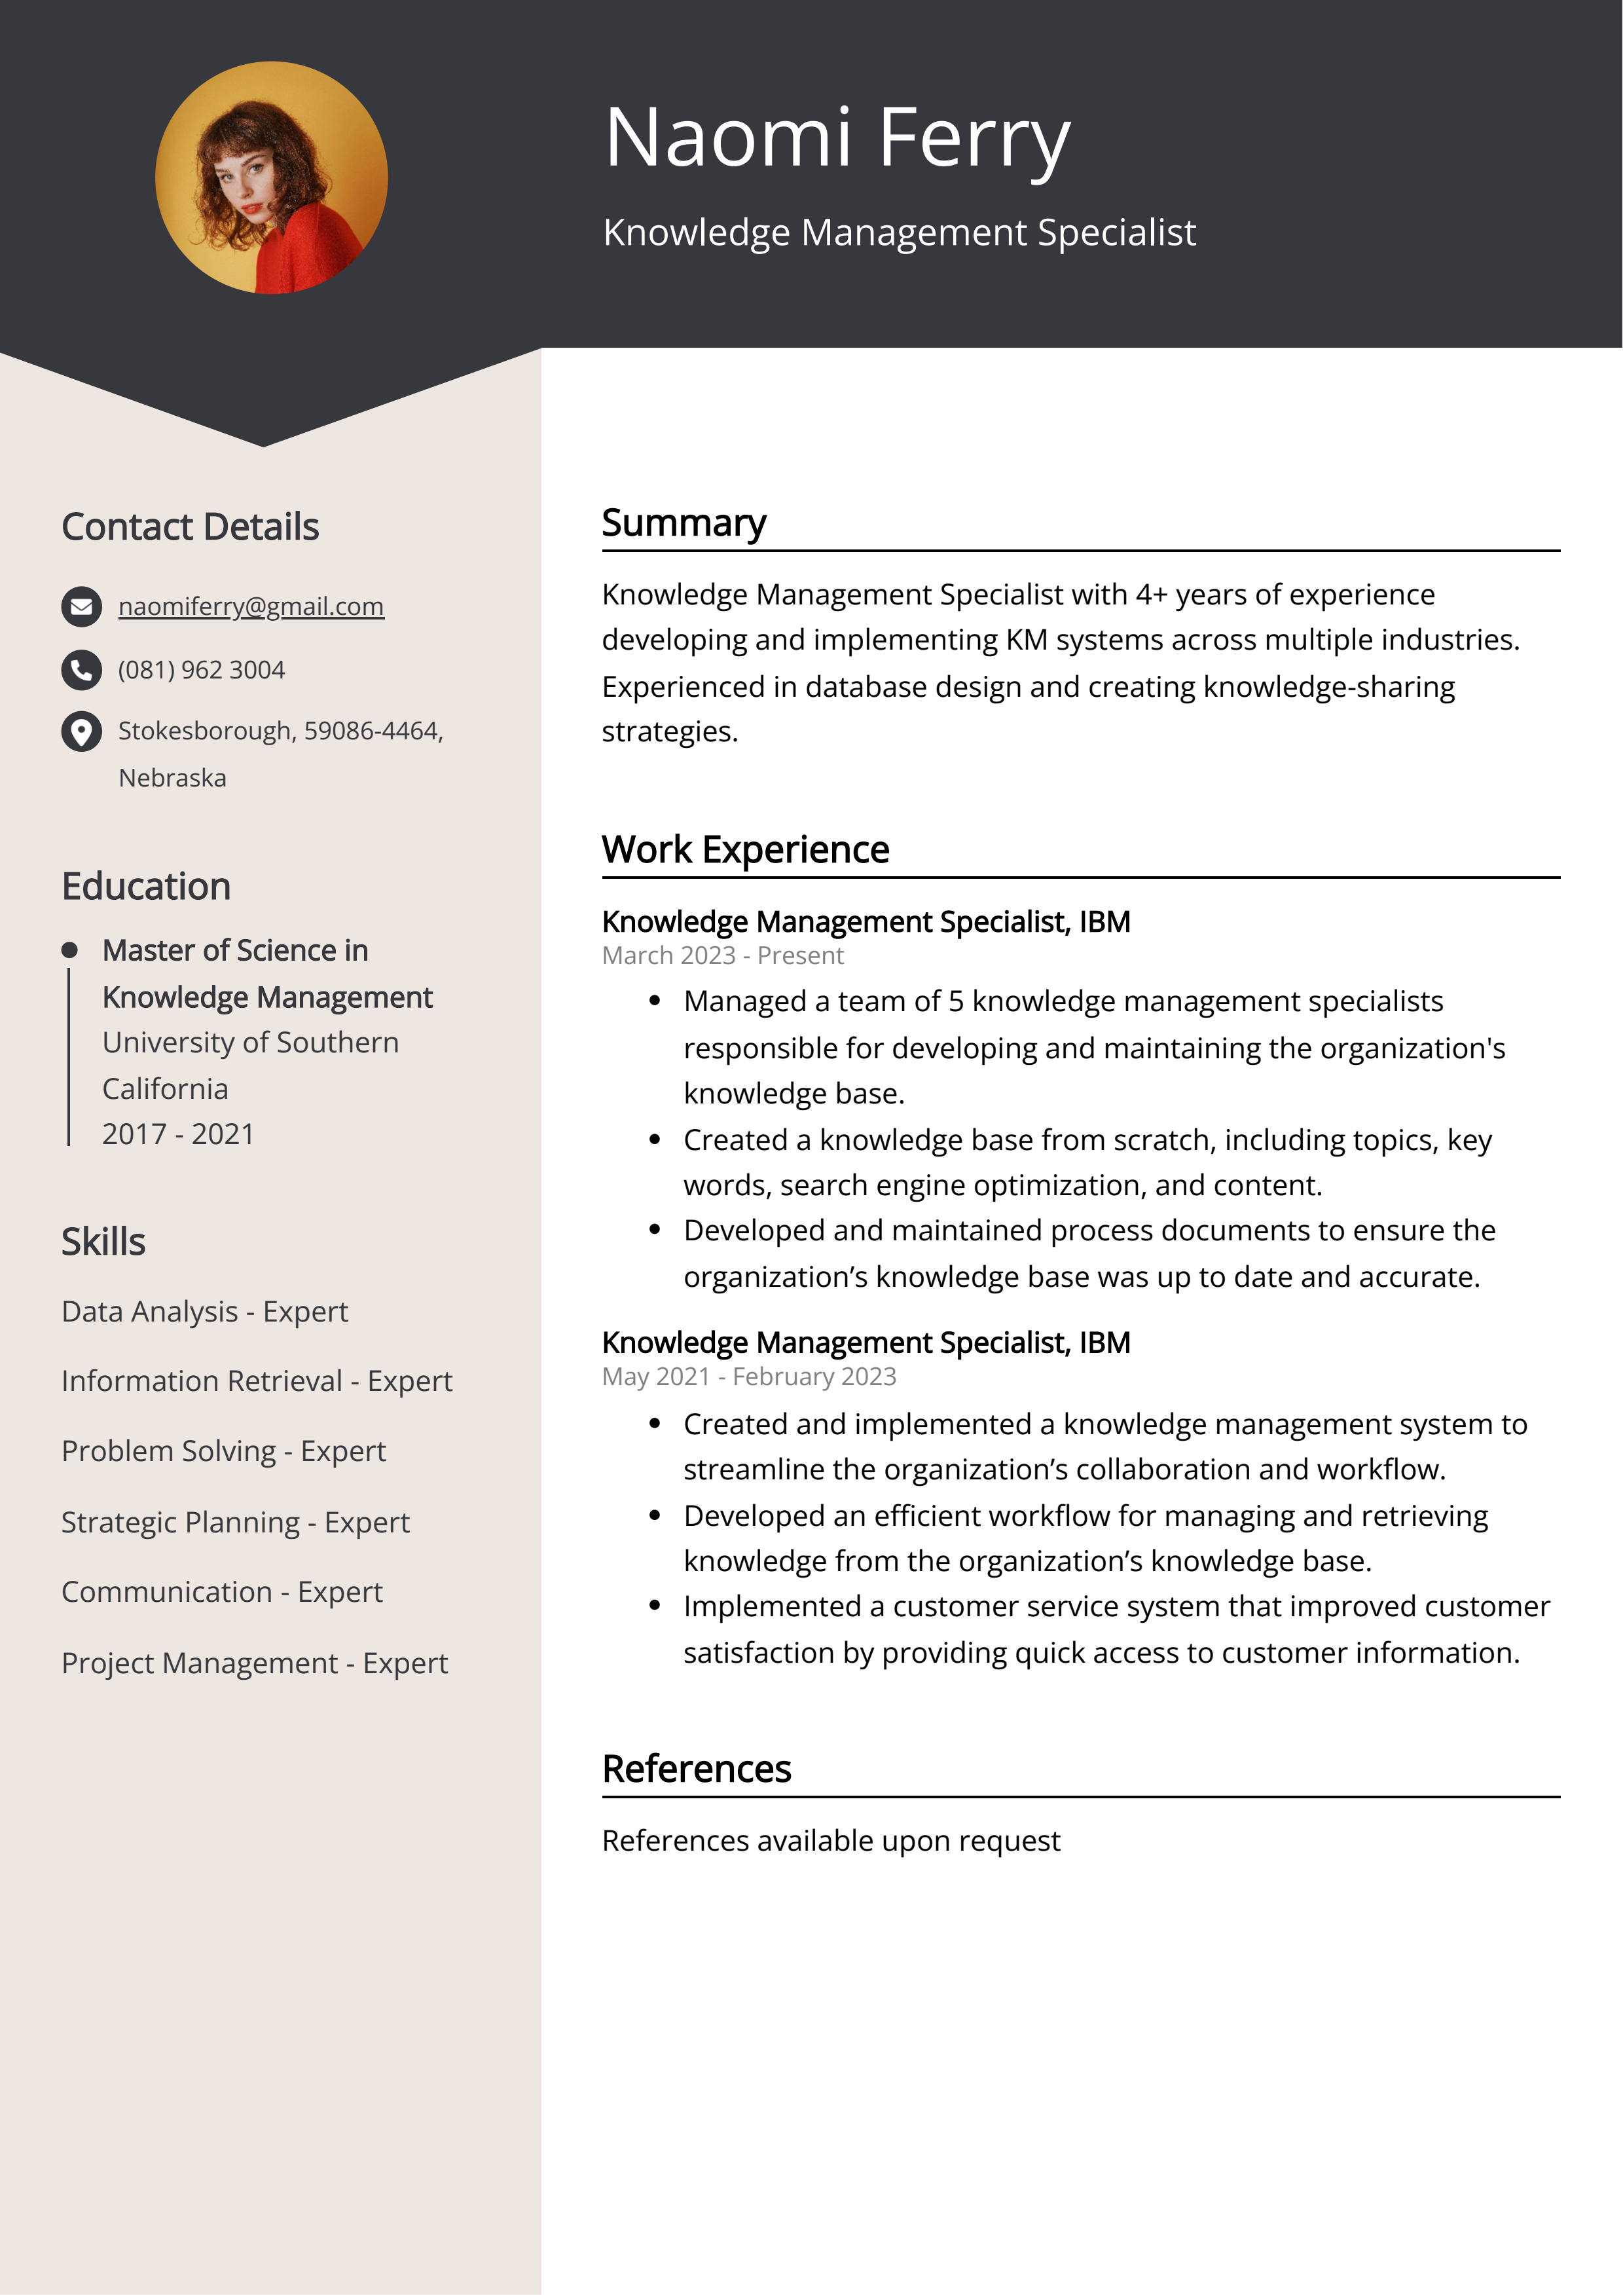 Knowledge Management Specialist Resume Example